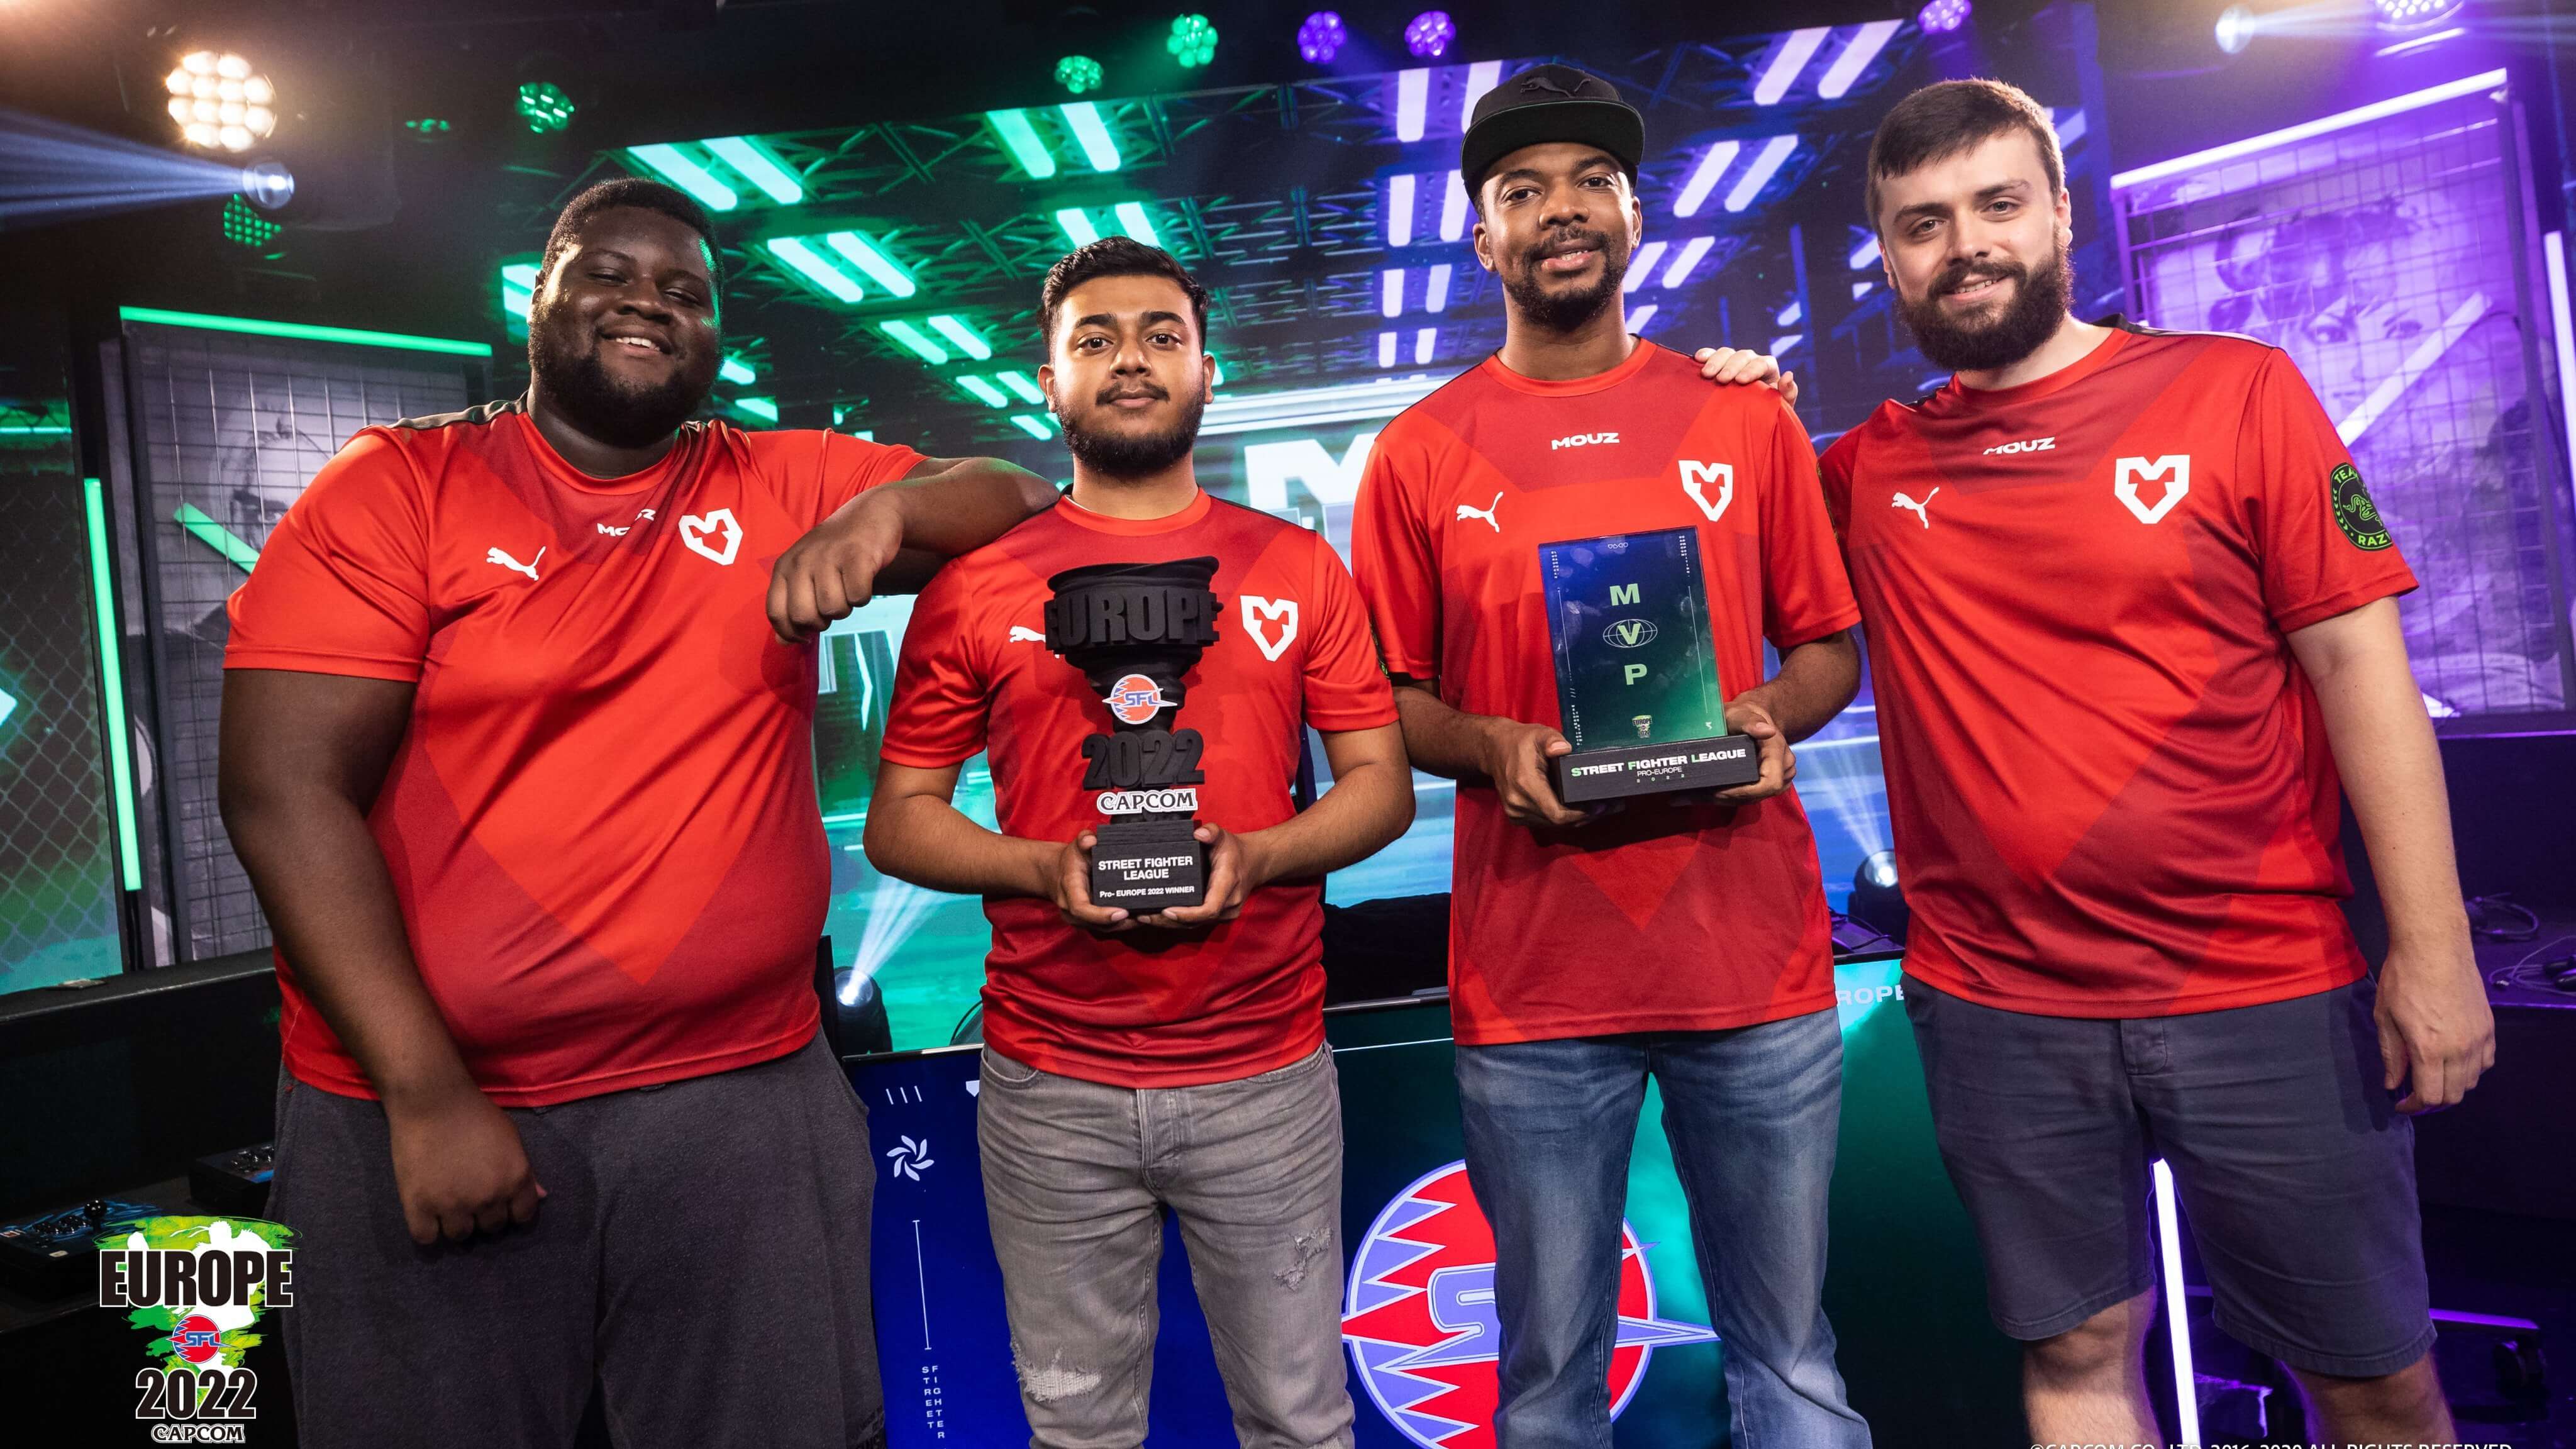 MOUZ DEFEATS BMS TO BECOME WINNER OF FIRST STREET FIGHTER LEAGUE PRO-EUROPE 2022